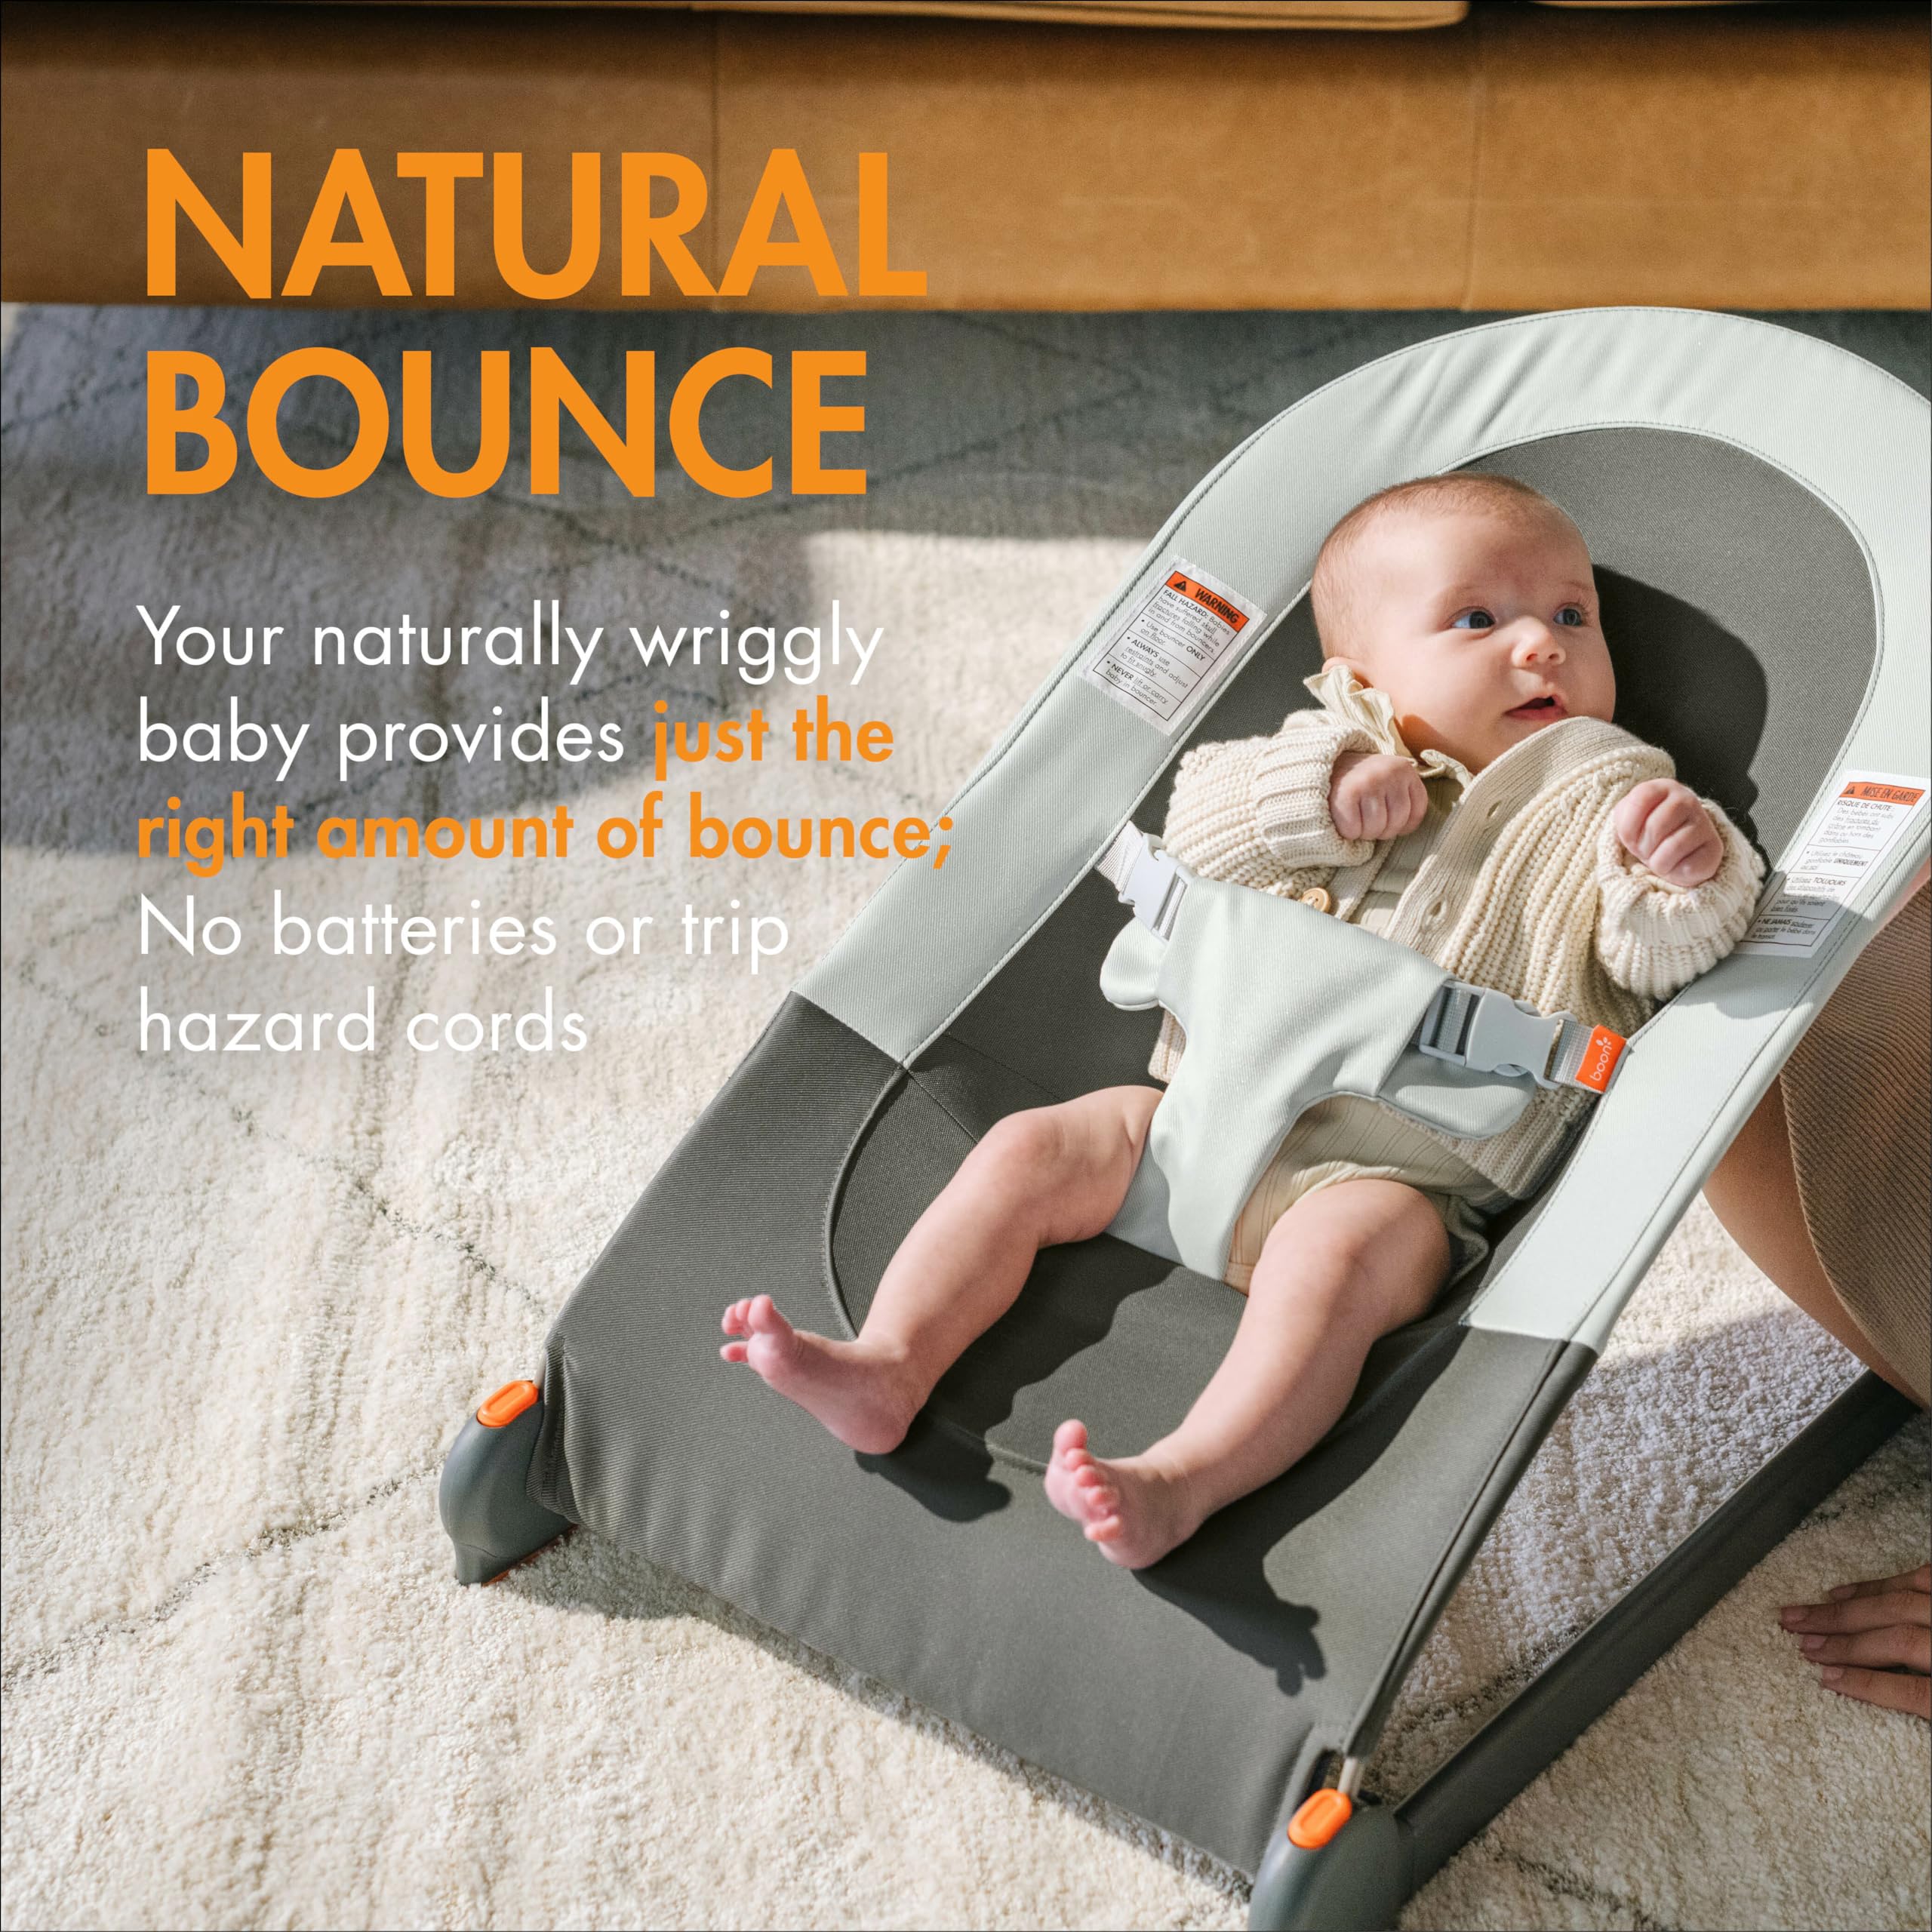 Boon Slant Portable Baby Bouncer - Folding Baby Seat for Infants - Lightweight Portable Baby Chair with Machine Washable Fabric and 3-Point Harness - Gray